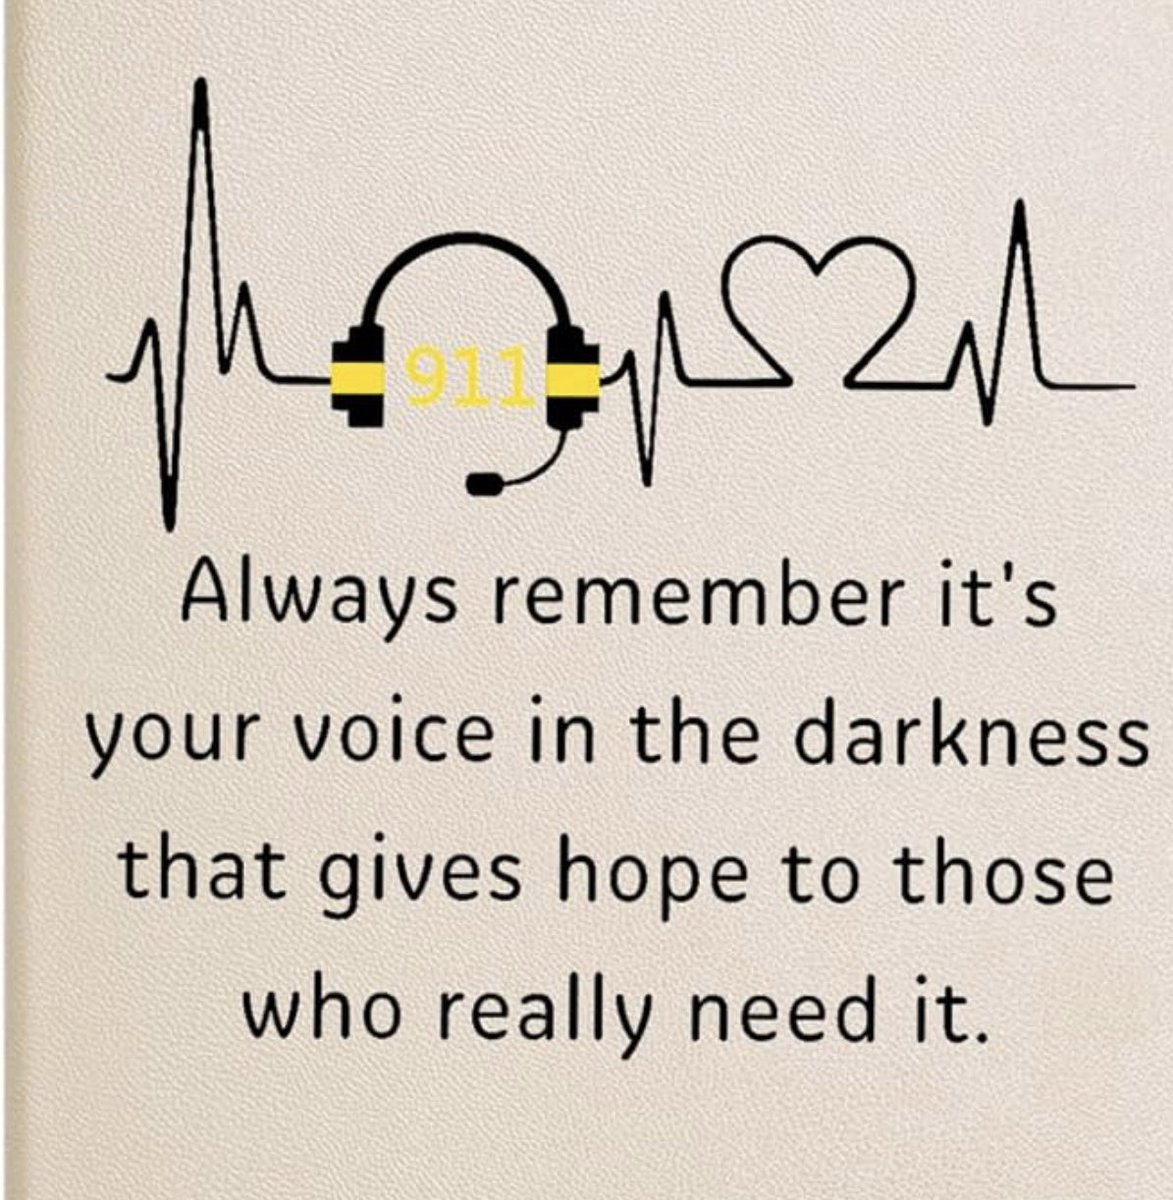 On this National Telecommunications Public Safety Week @Associationdrp gives thanks to those members who play such a vital role behind the scenes. Thank you to our 911 Communicators for your hard work & calm professionalism. 💛💛💛